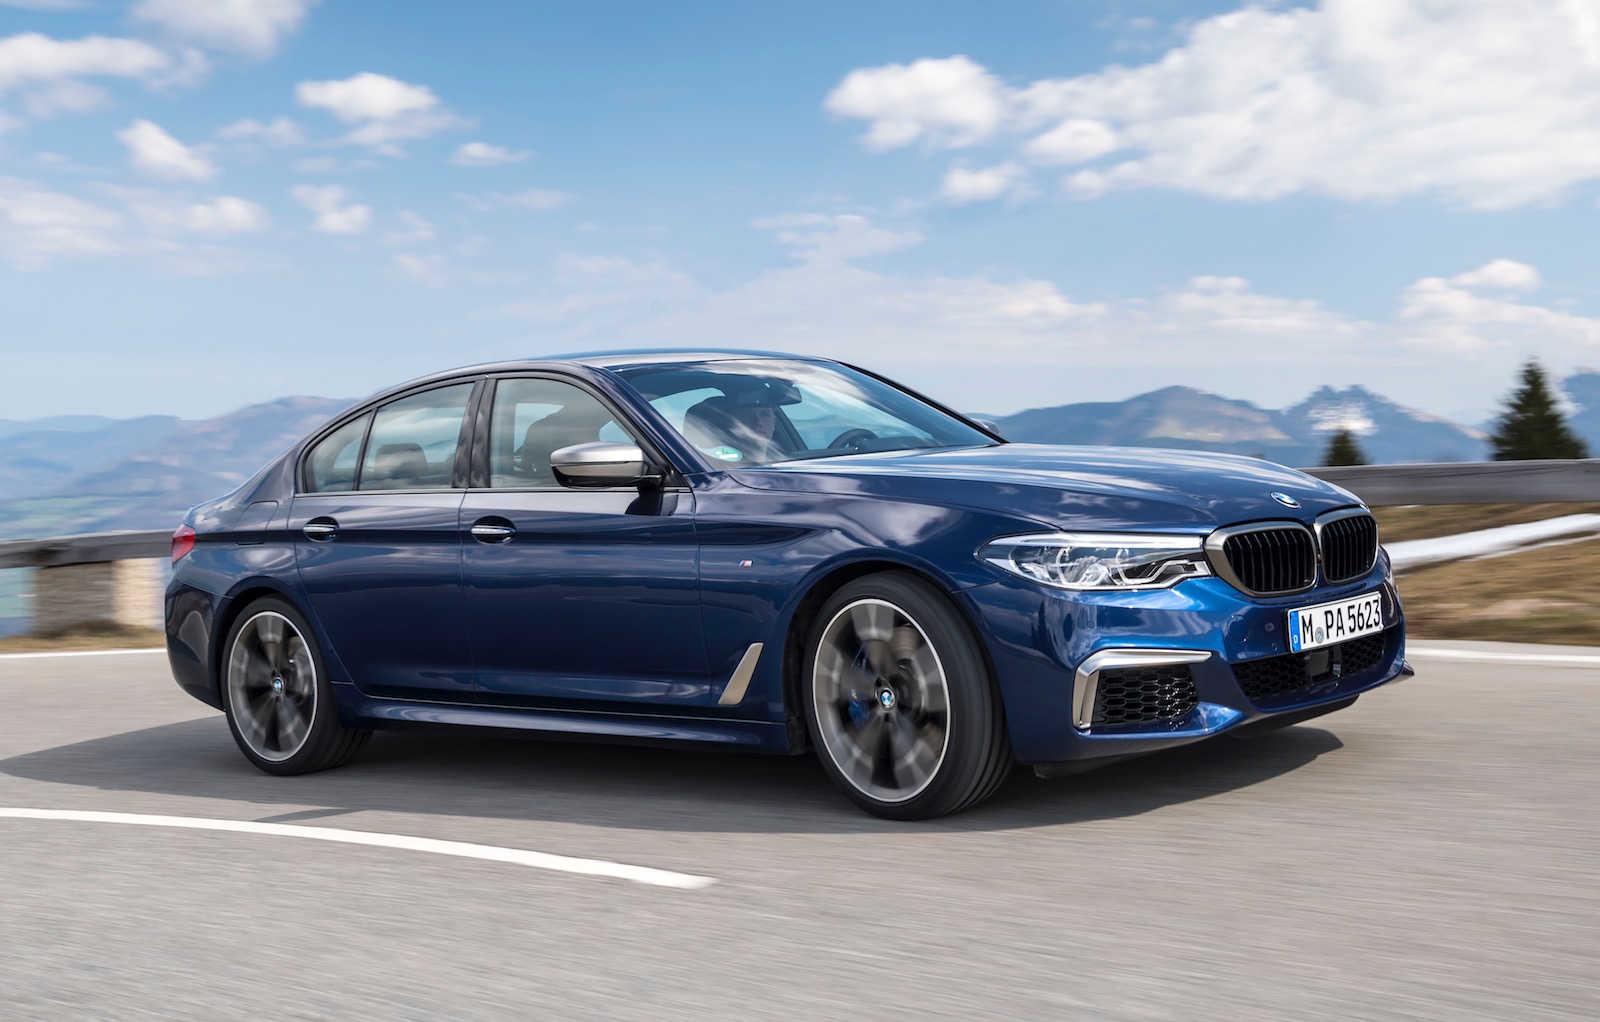 2017 BMW M550i revealed; quicker, more efficient than M5